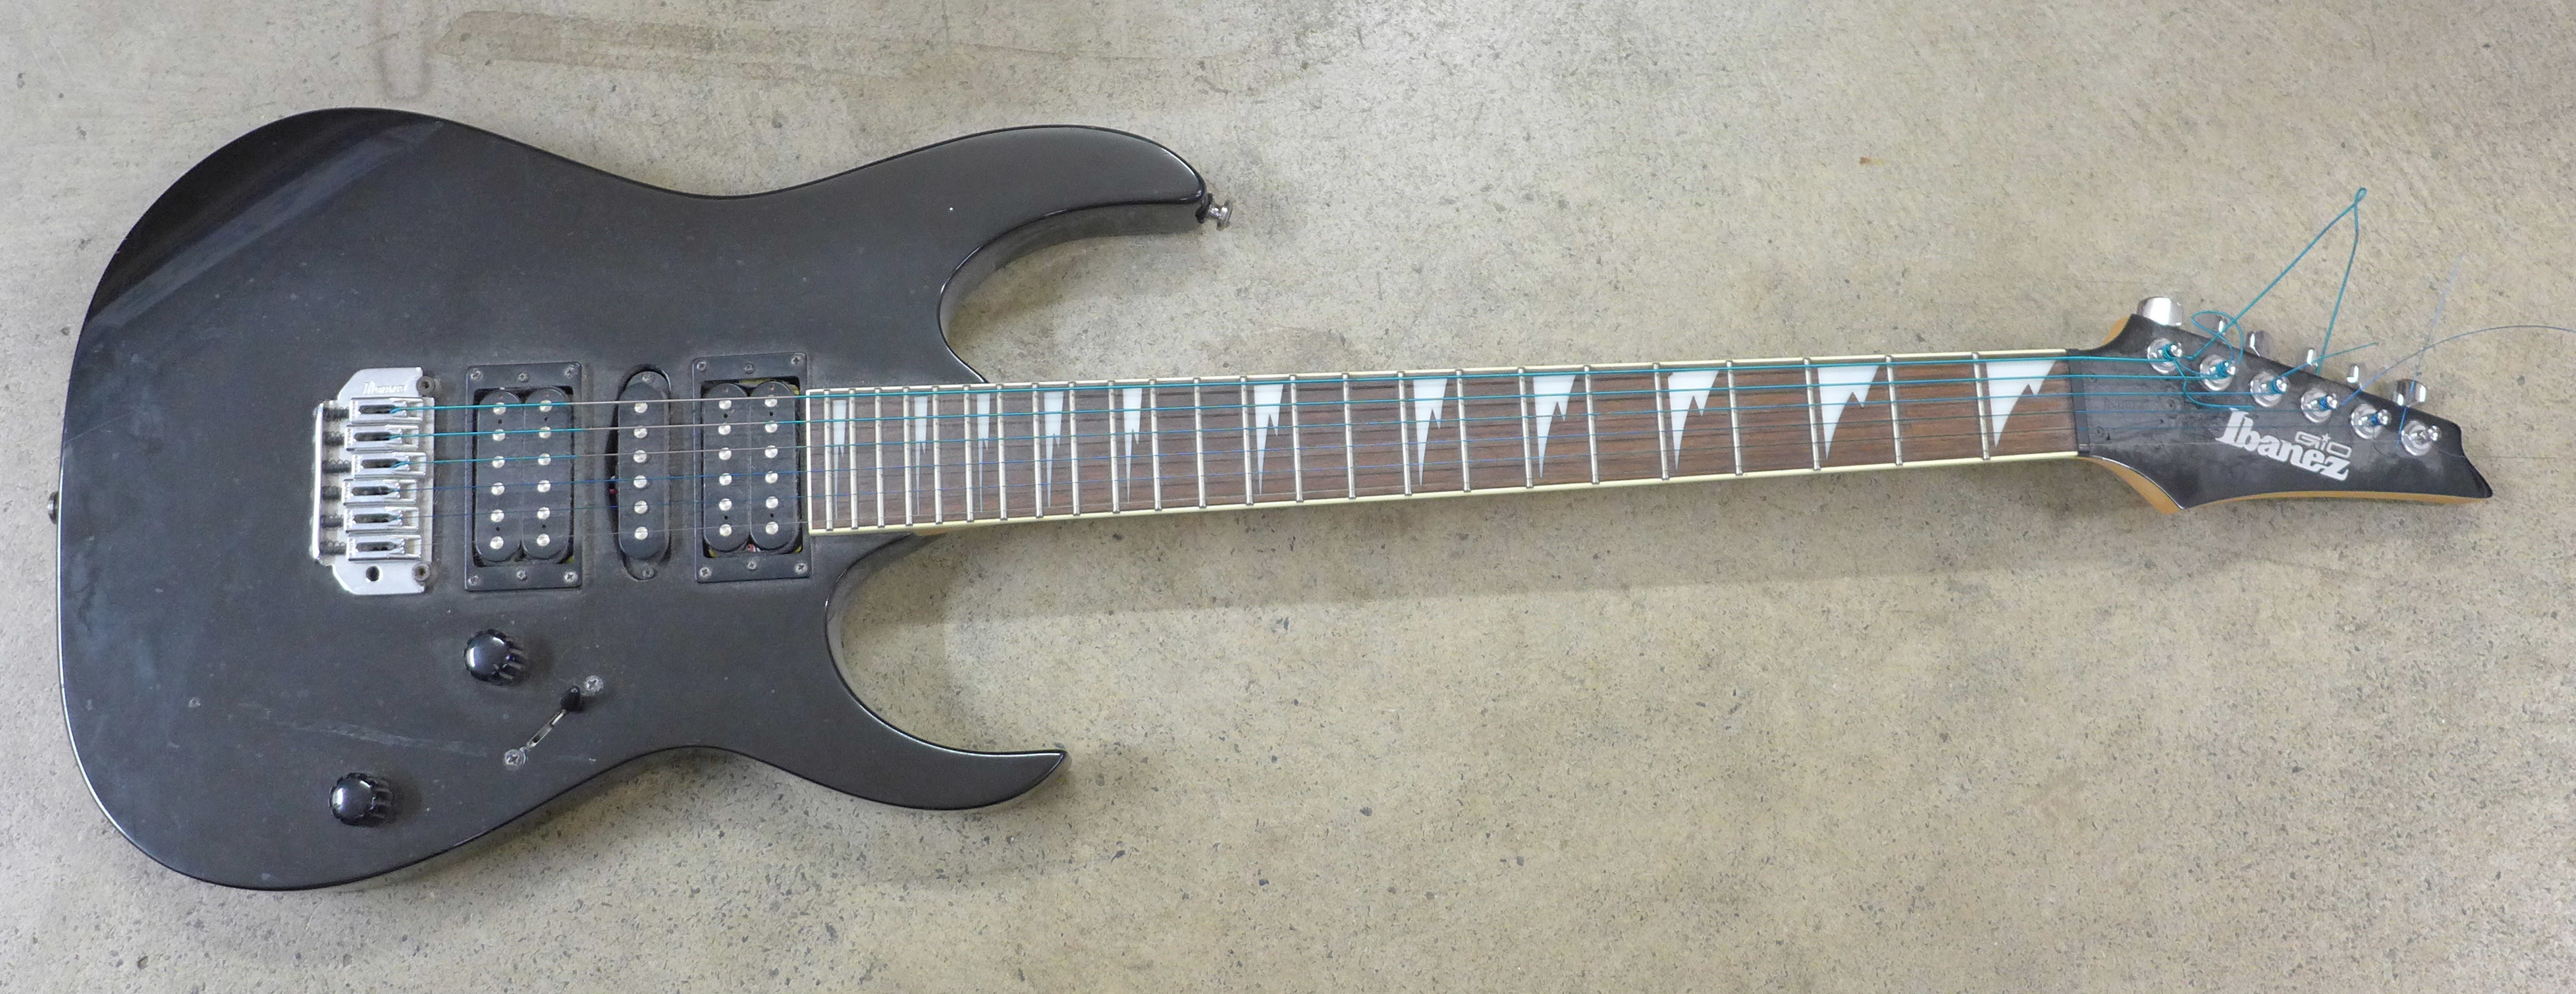 A Gio Ibanez electric guiter